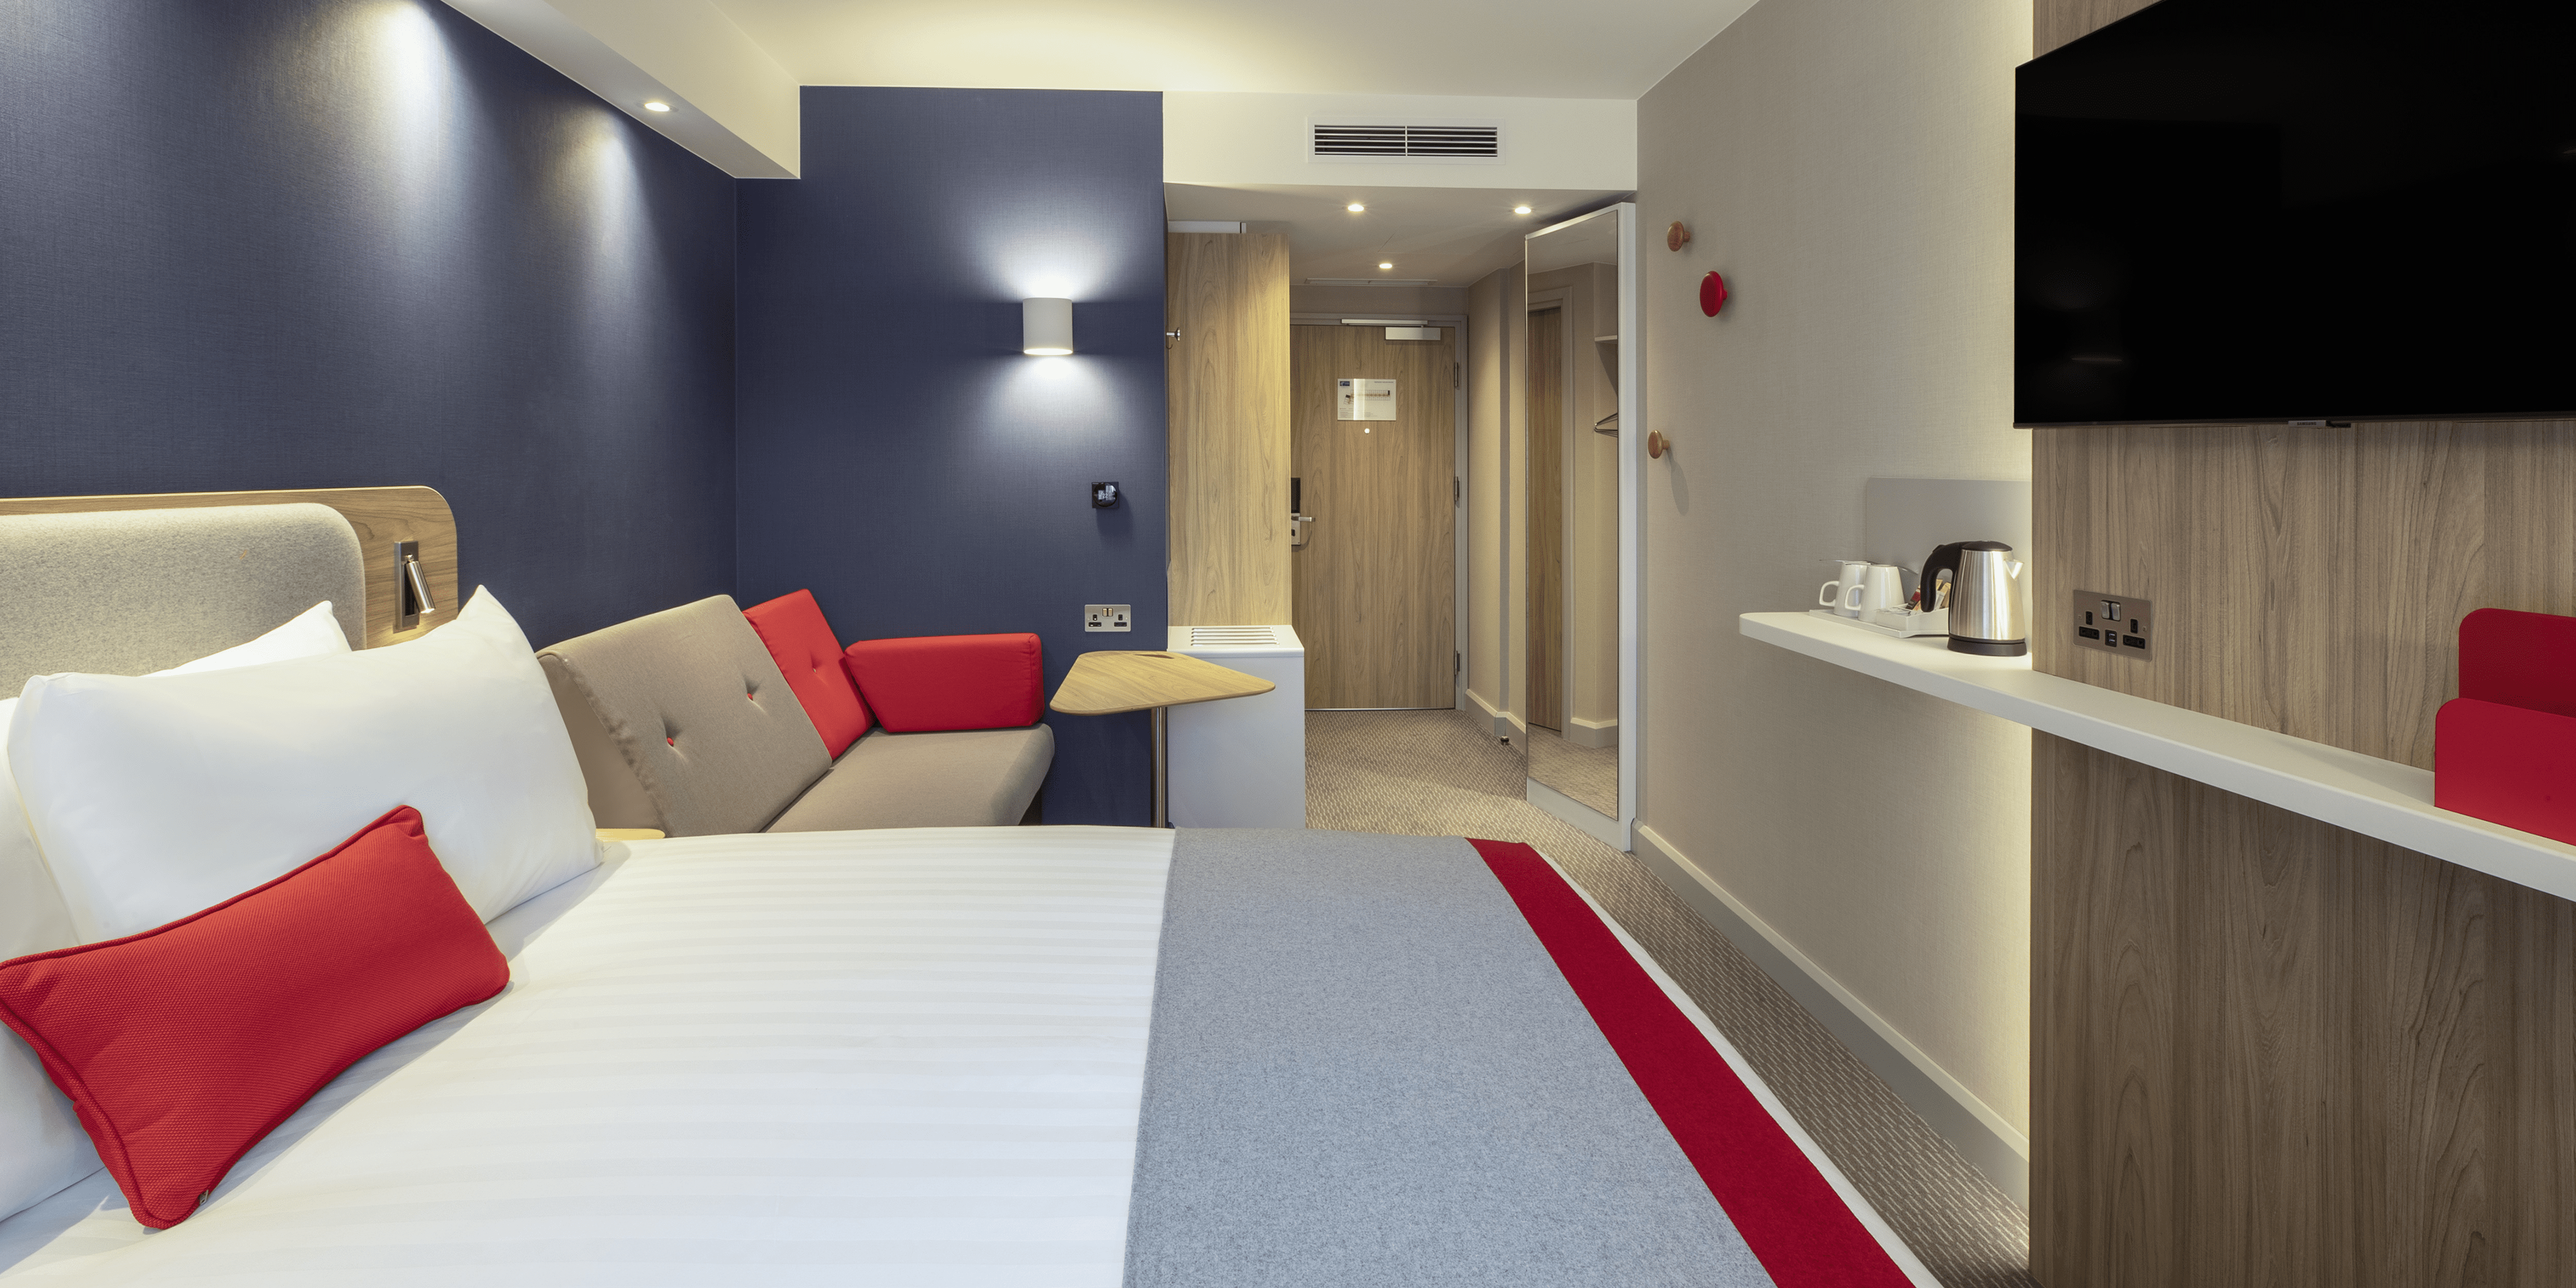 Holiday Inn Express Liverpool - Central welcomes guests to the heart of the historic Ropewalks, Liverpool